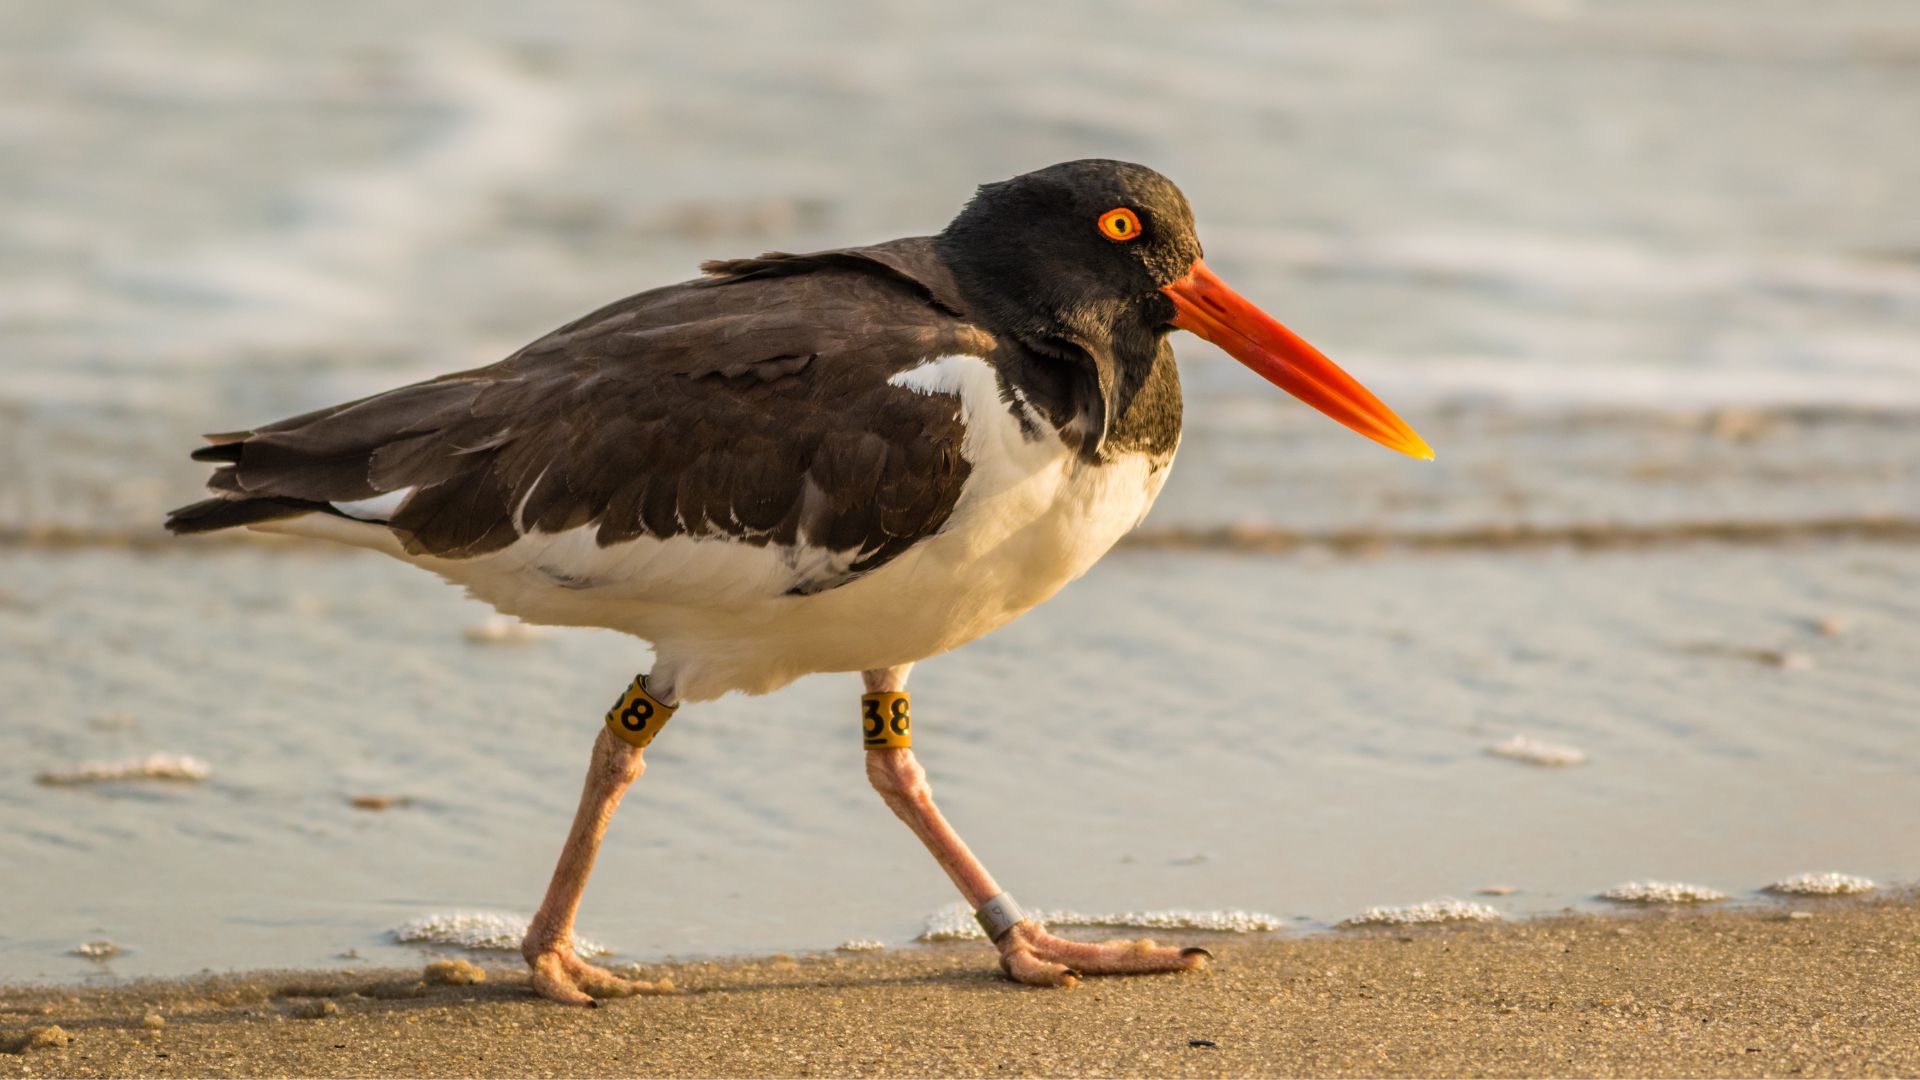 An American Oystercatcher walking on the beach at sunrise in Cape May, NJ.